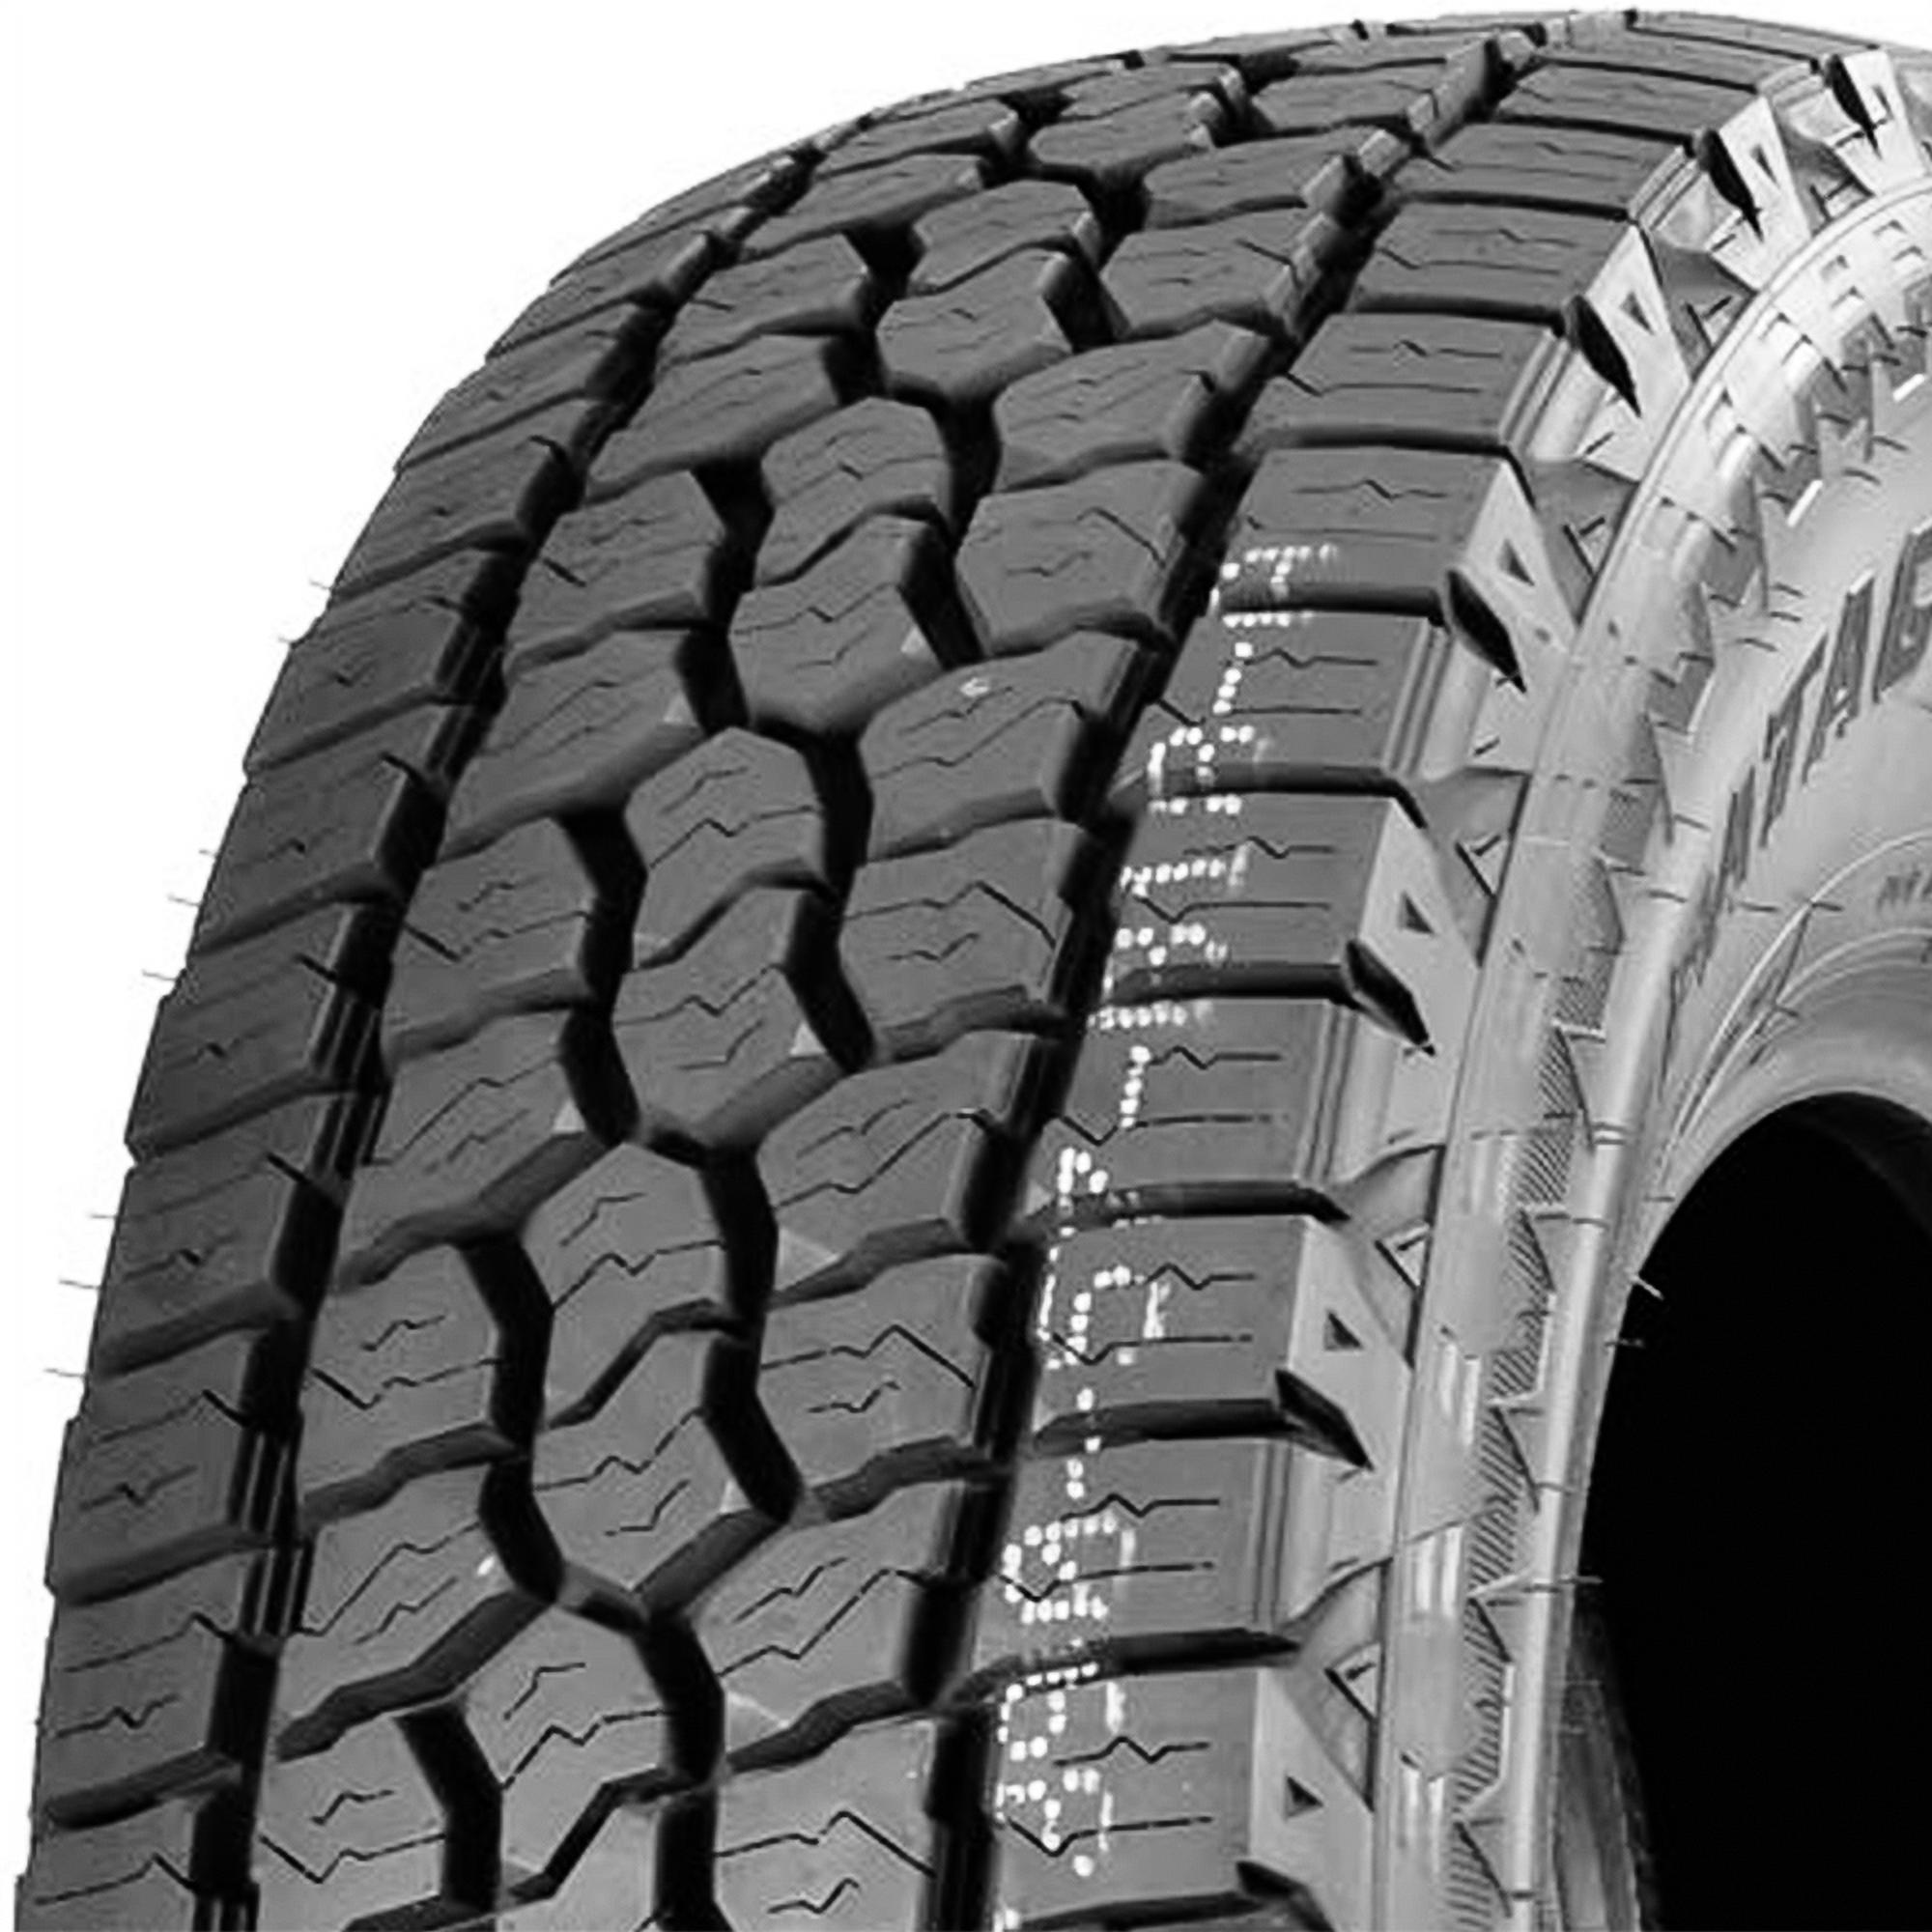 Pair of 2 (TWO) Milestar Patagonia A/T R LT 305/55R20 Load E 10 Ply Rugged Terrain Tires - image 2 of 3